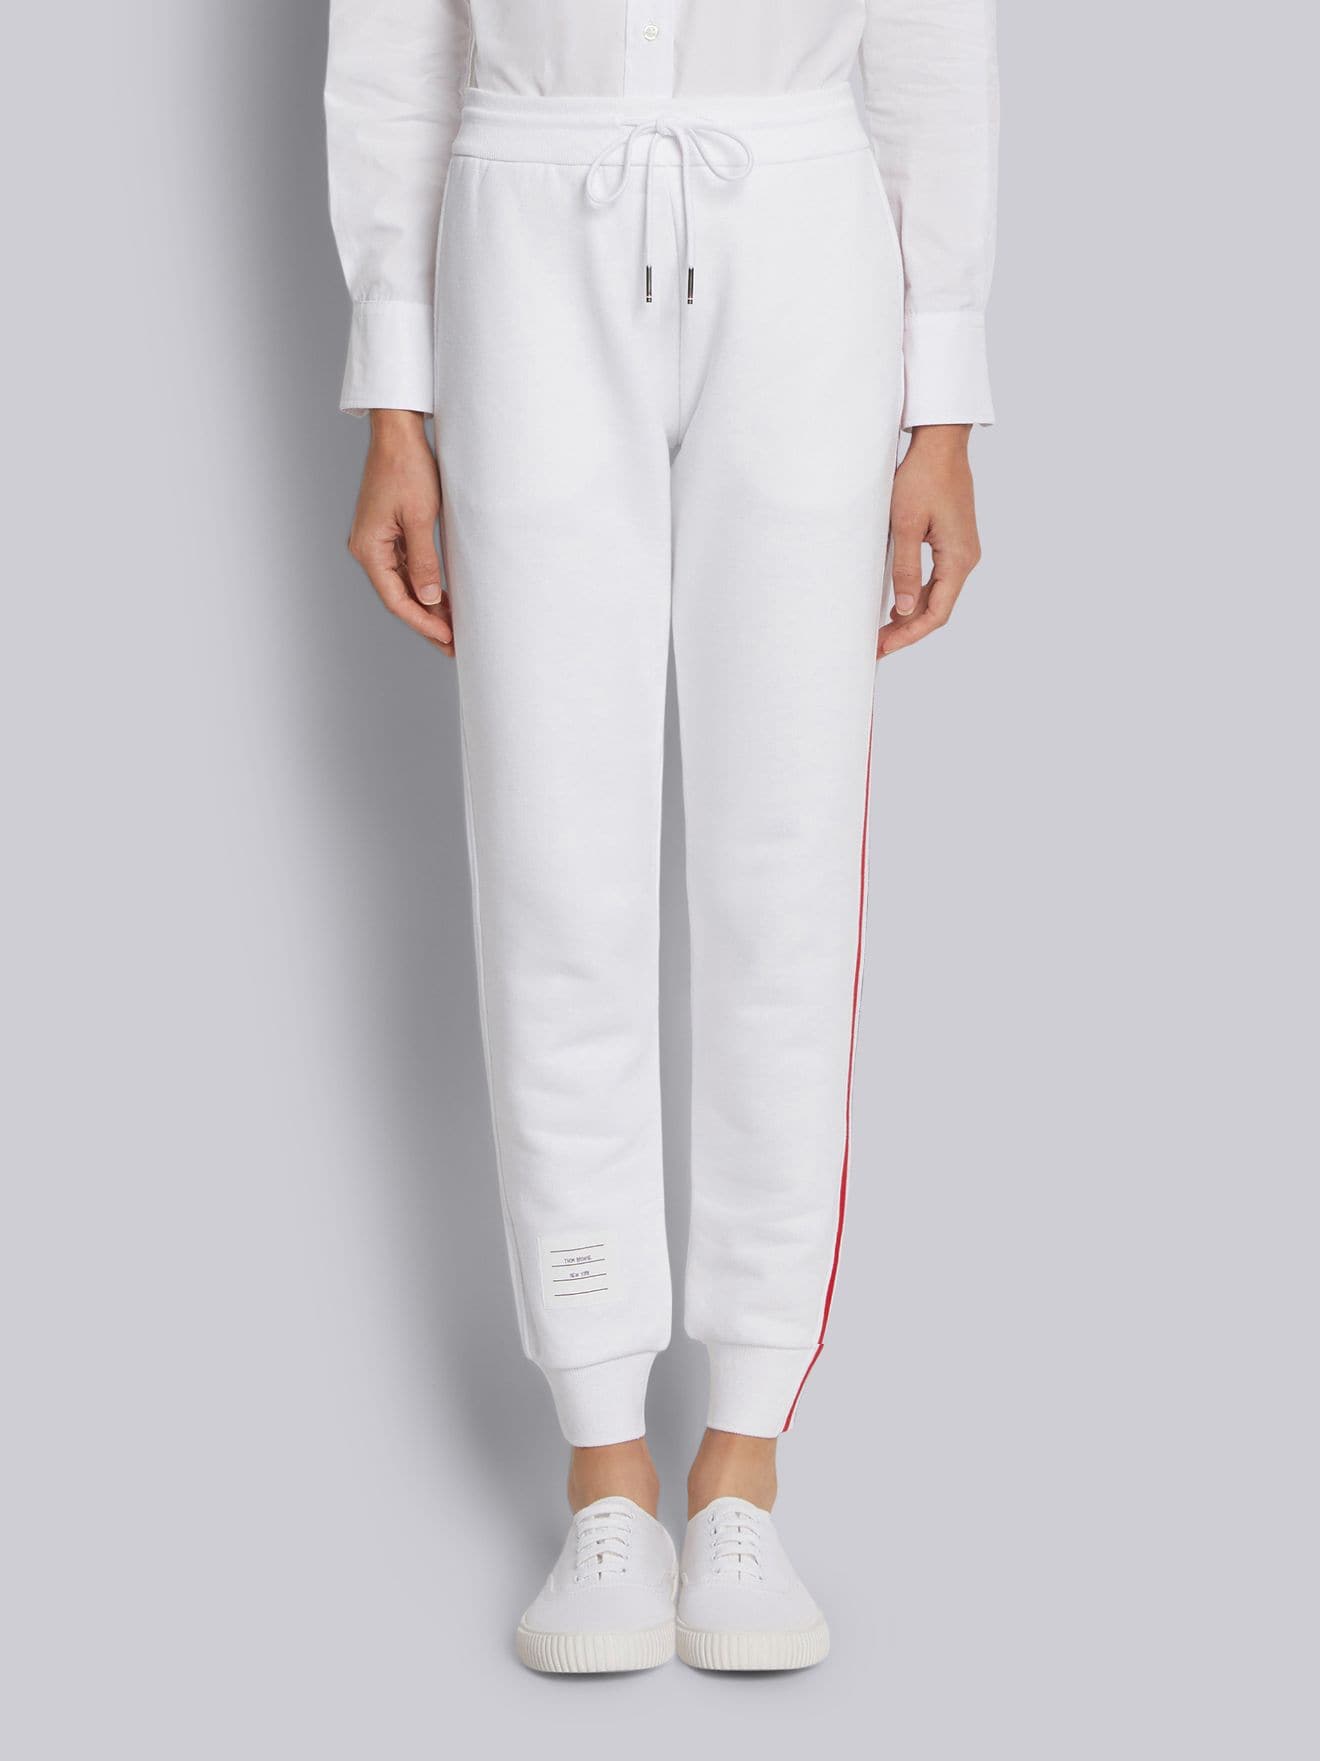 Women Track Pant, Model Name/Number: L1002 at Rs 945/piece in